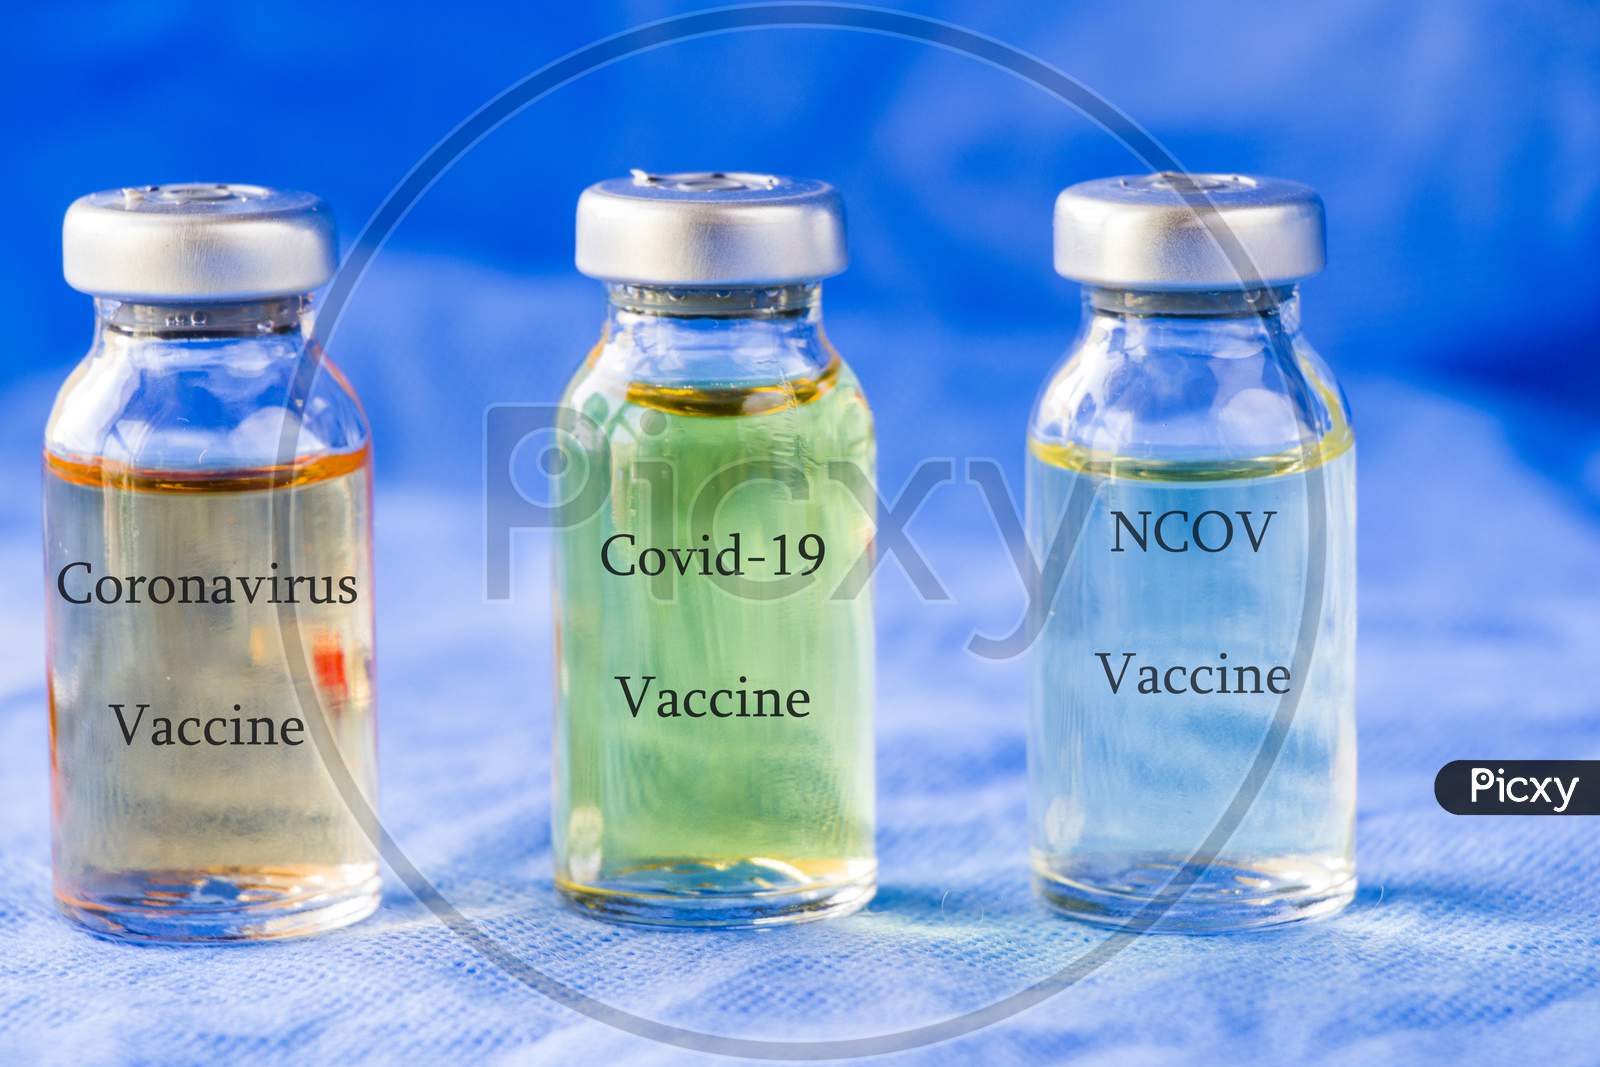 Corona Virus And Covid - 19 New Vaccine In Ampules, Different Color Variations Of Vaccine